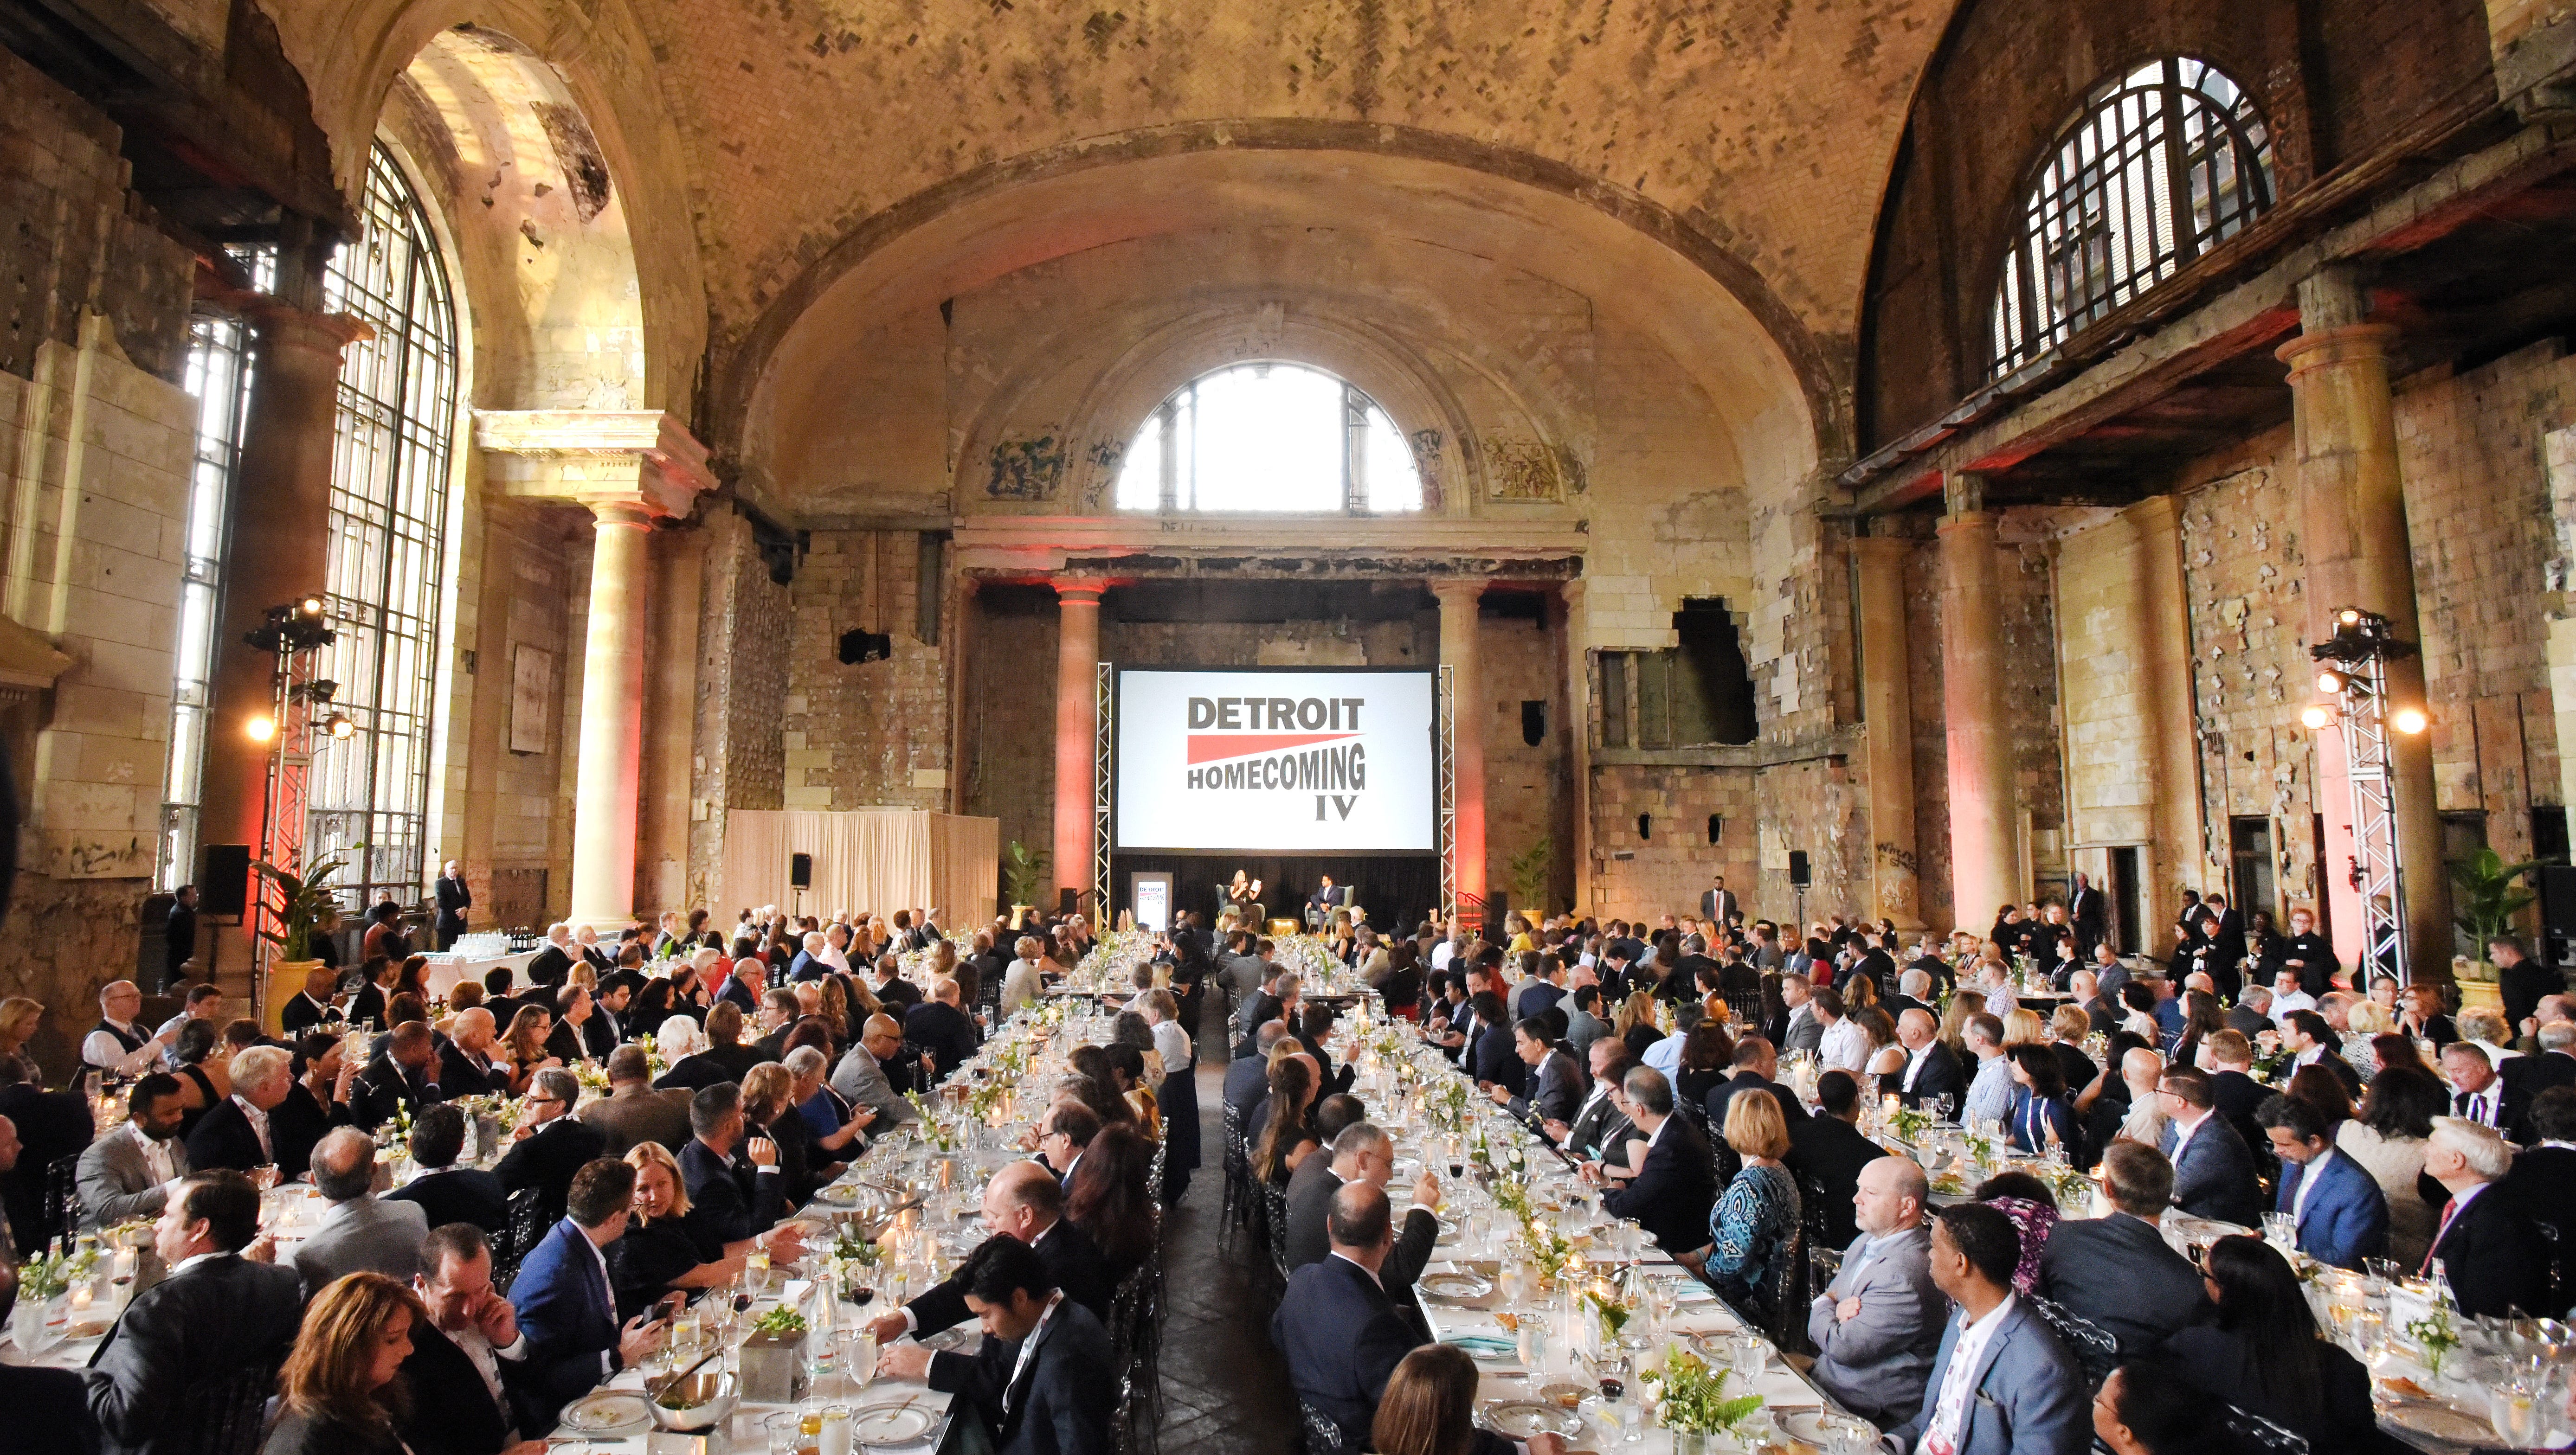 In September 2017, the first major civic event in decades was held at the old train station when about 400 former Detroiters and local business and civic leaders shared a meal for the fourth annual Detroit Homecoming program.